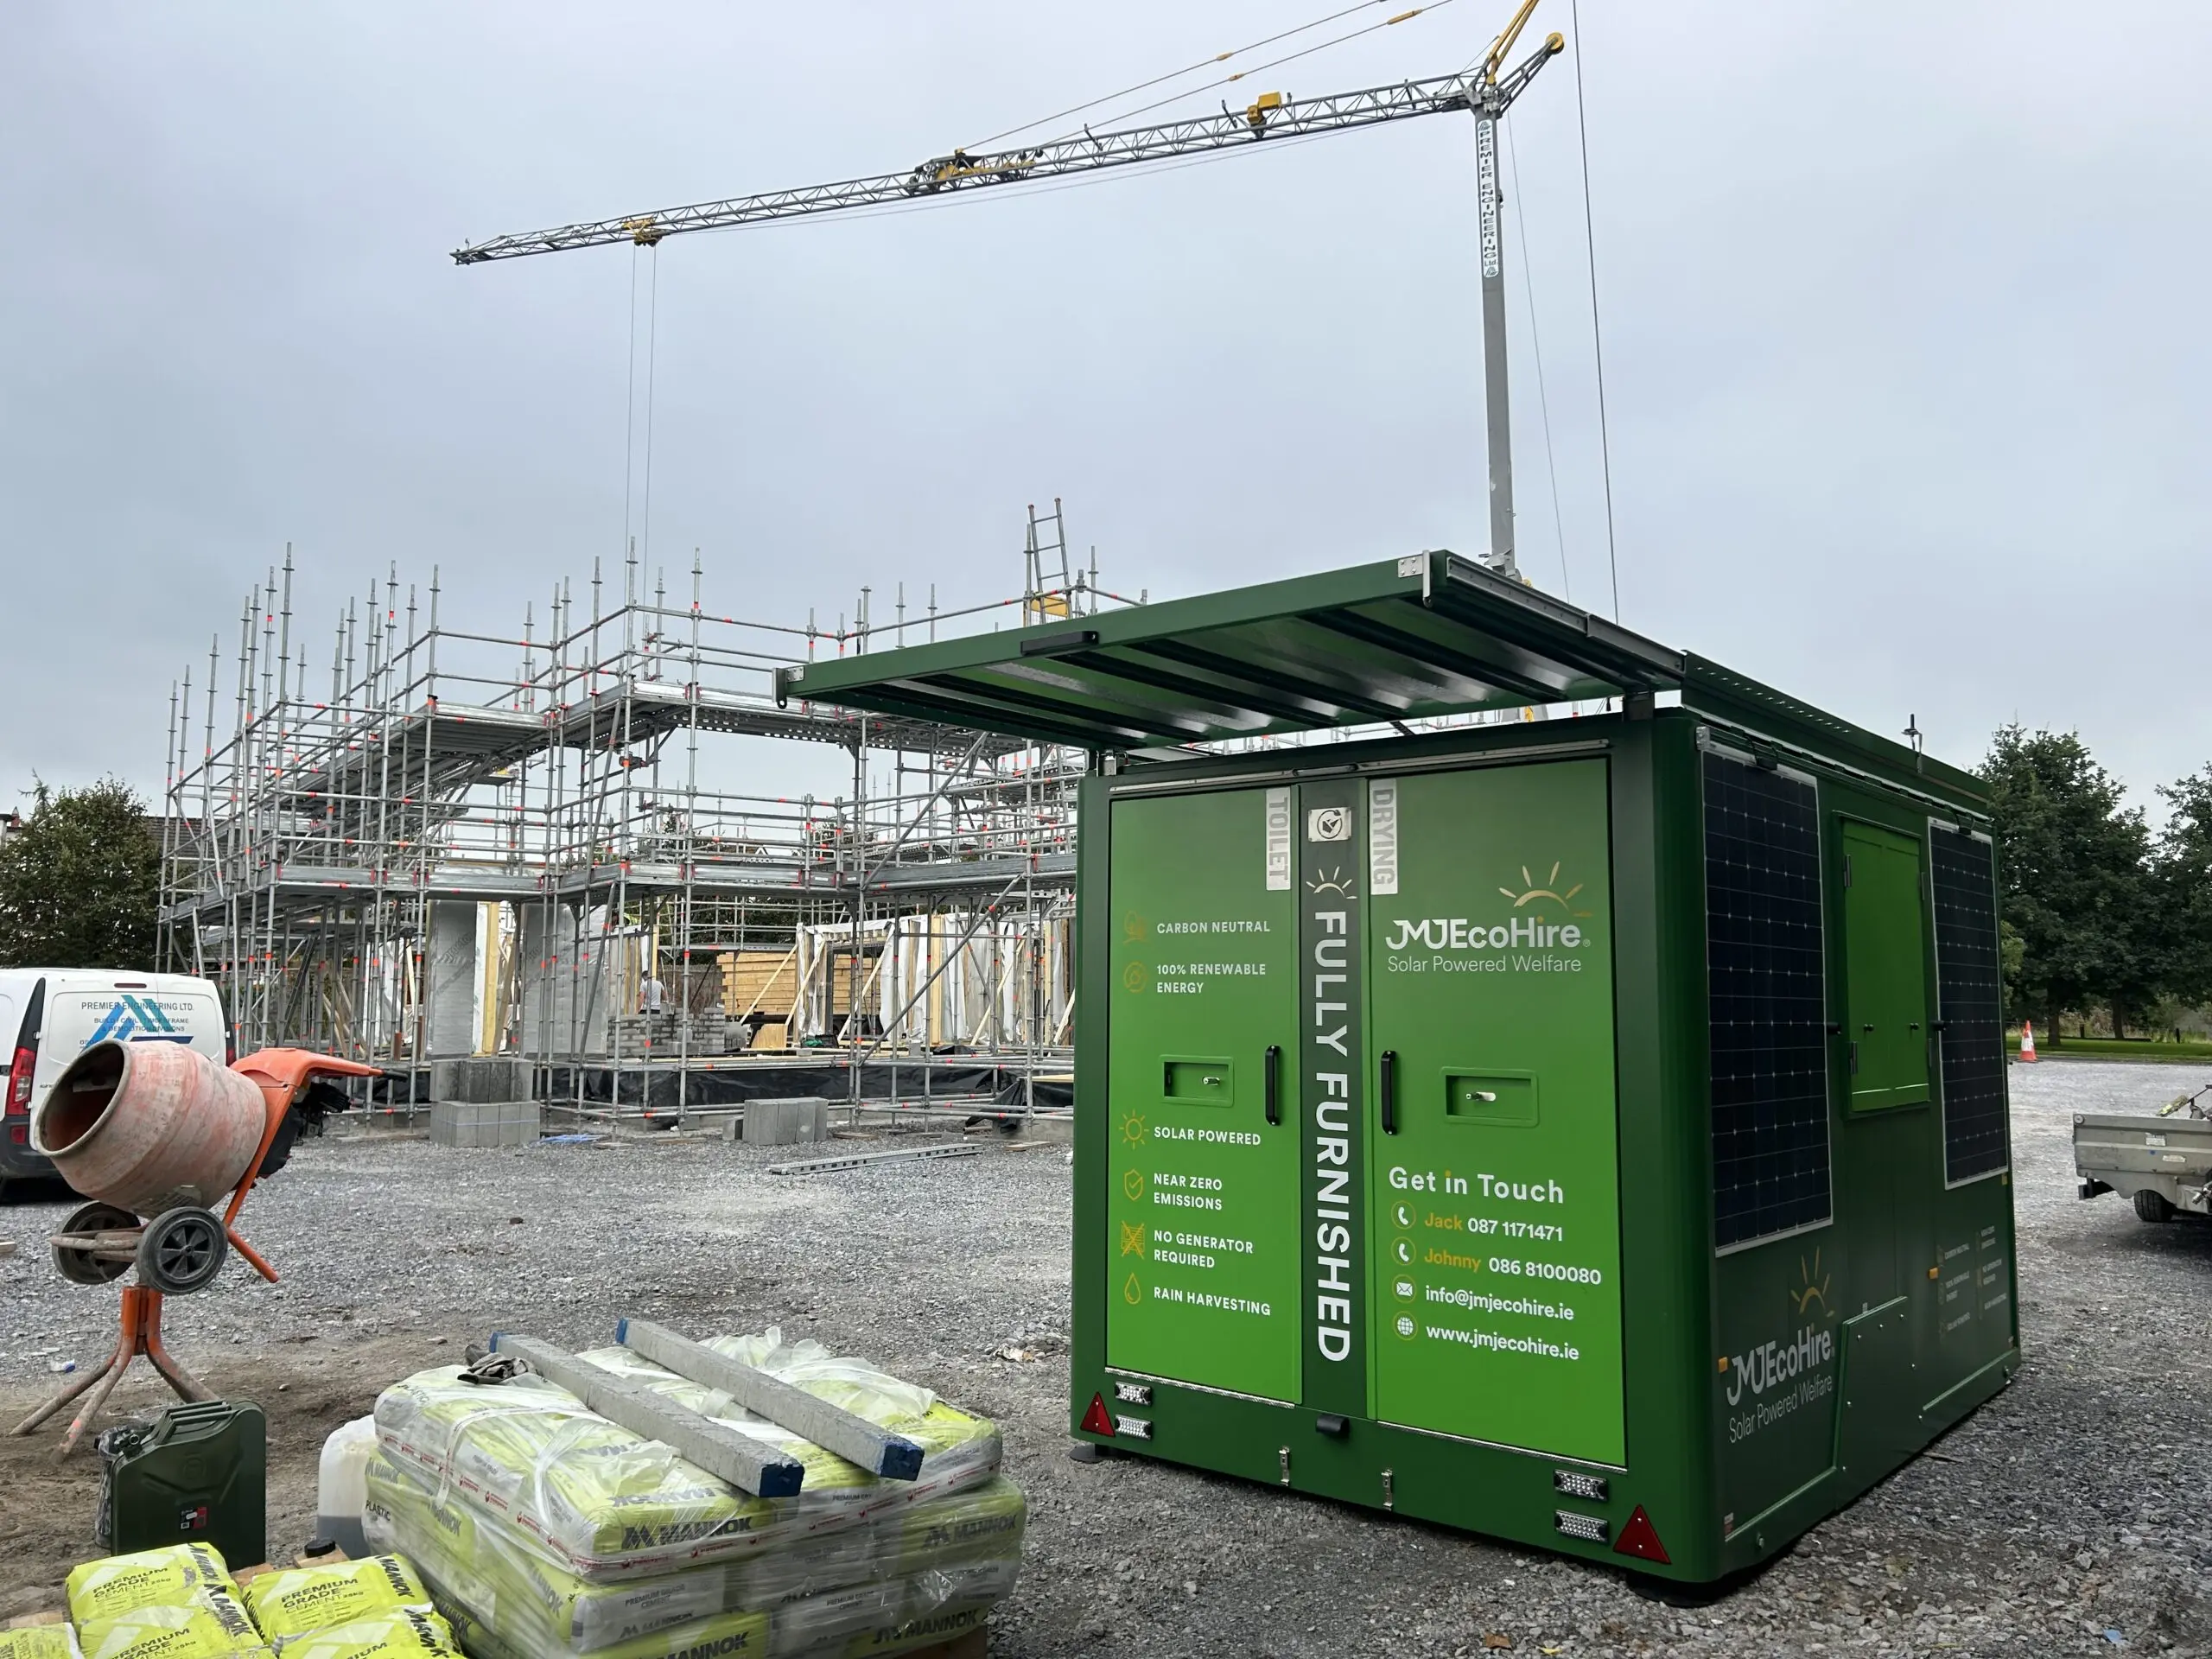 Today, our team delivered a state-of-the-art 12-foot fully solar powered welfare unit to one of Premier Engineering's construction sites in Thurles. What makes this unit even more remarkable is that it operates in complete silence, as it is free from an onboard generator, making it the perfect choice for projects located in close proximity to neighboring areas. We are also thrilled to be contributing to Premier Engineering's efforts to reduce their CO2 emissions.